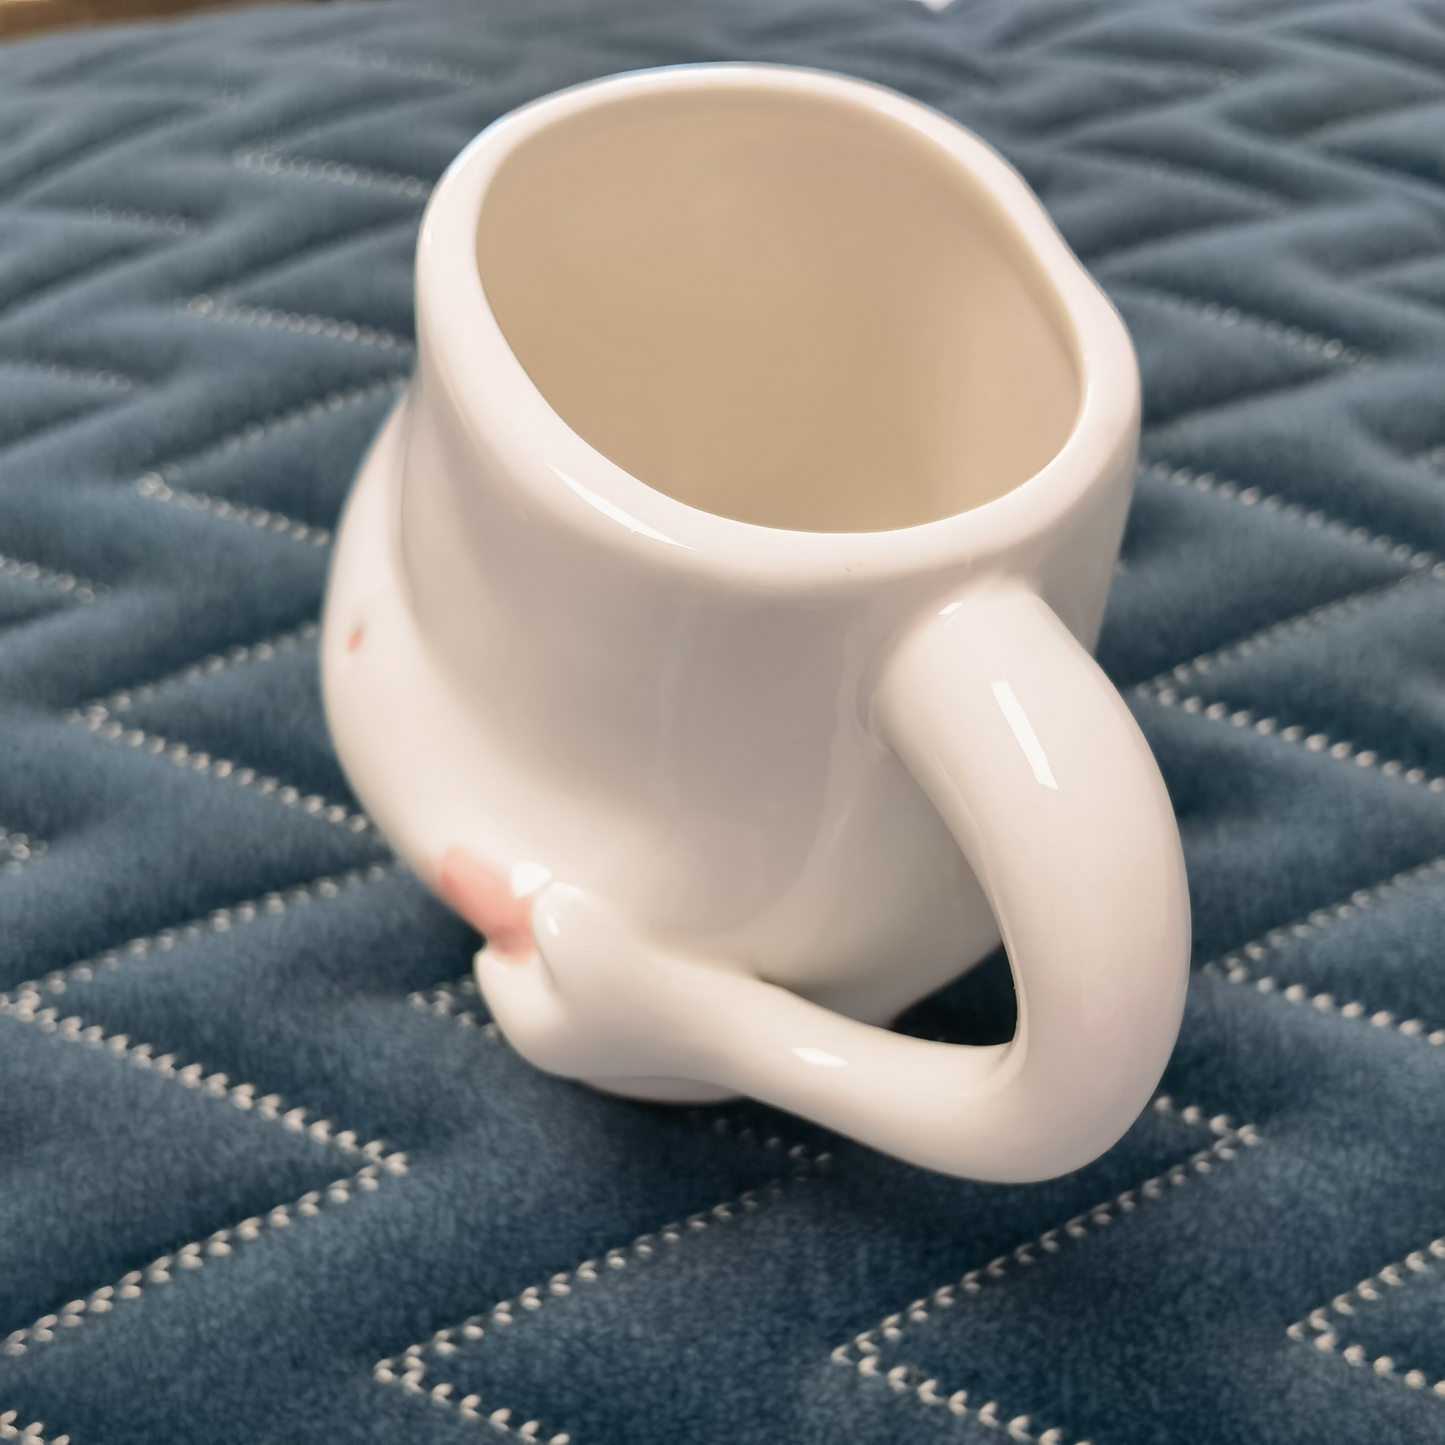 Funny Fat Belly Mugs for Guys